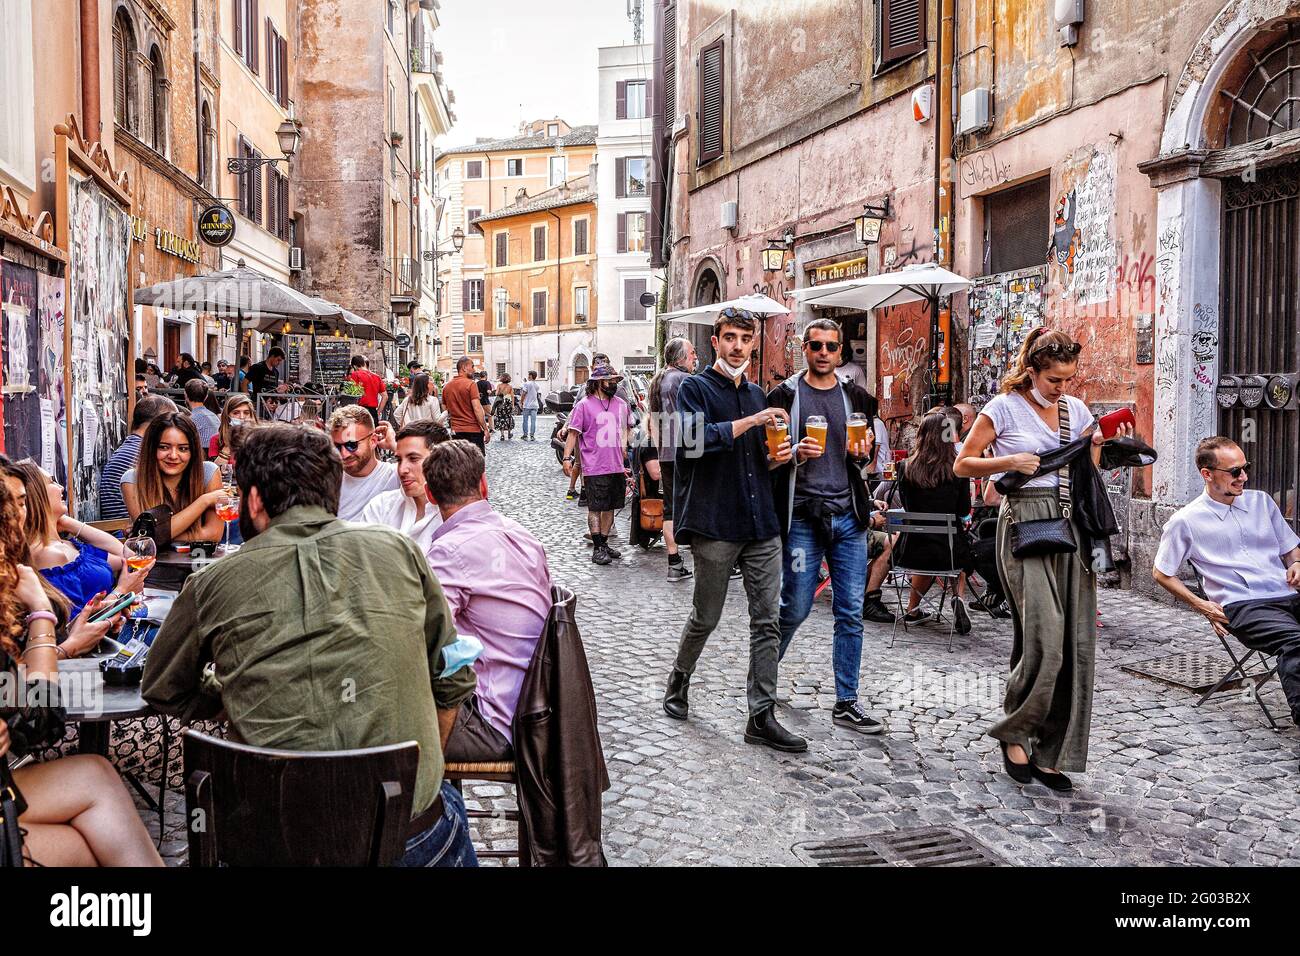 People out and about enjoying an early evening drink in Rome's Trastevere district Stock Photo